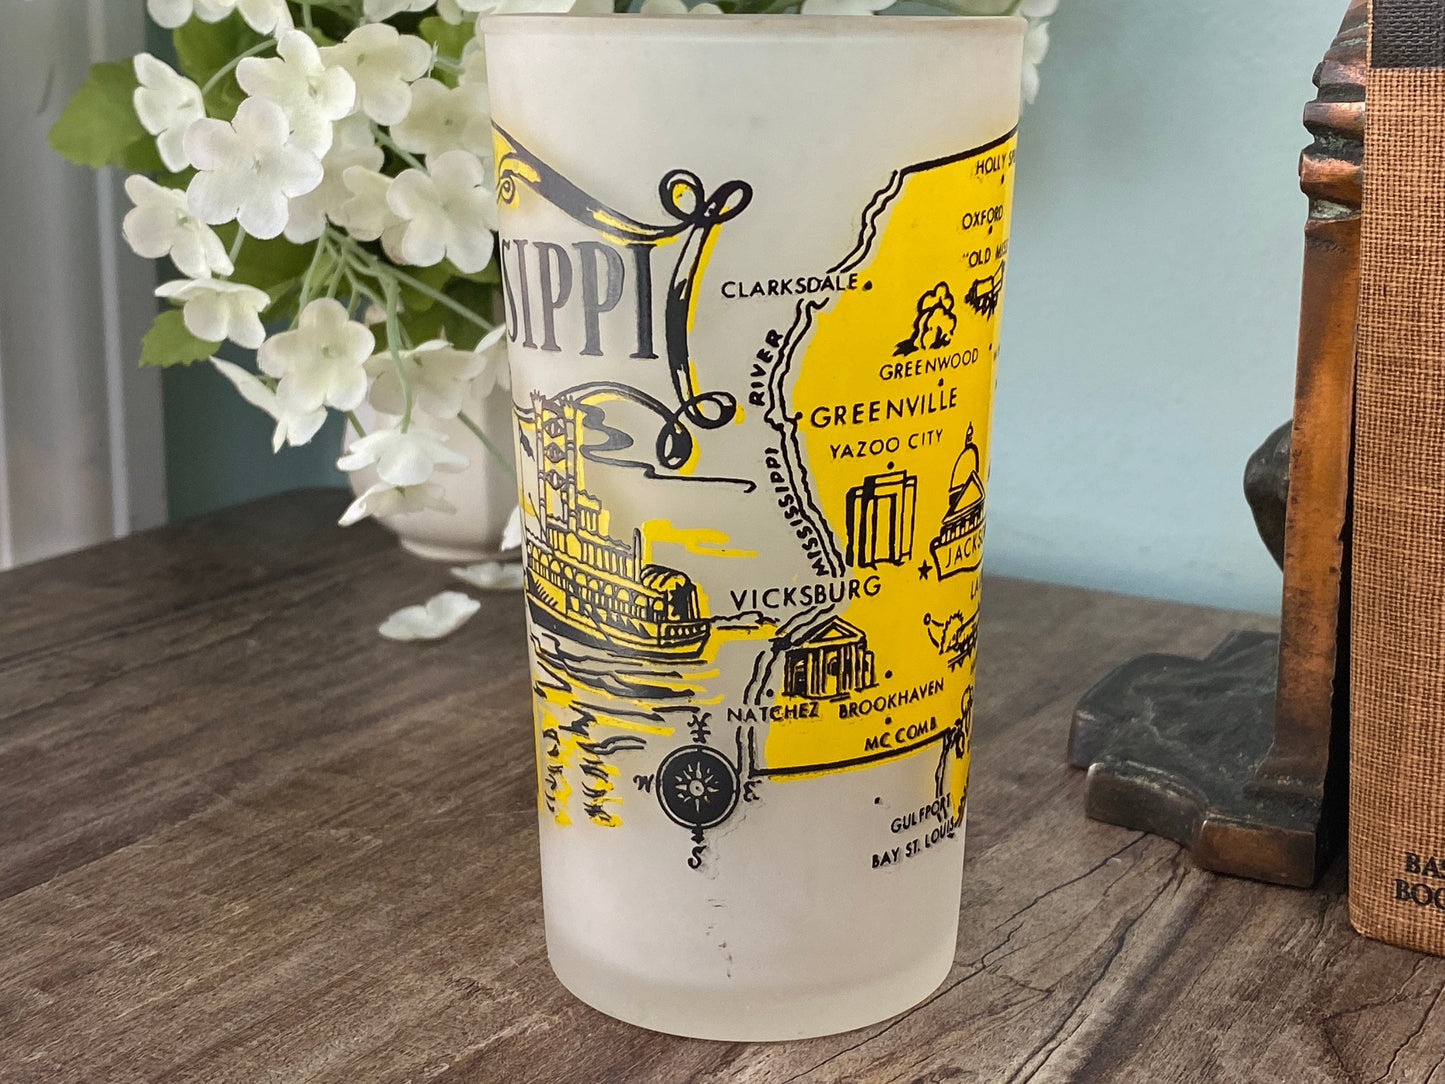 Midcentury Mississippi Souvenir Glass with State Map